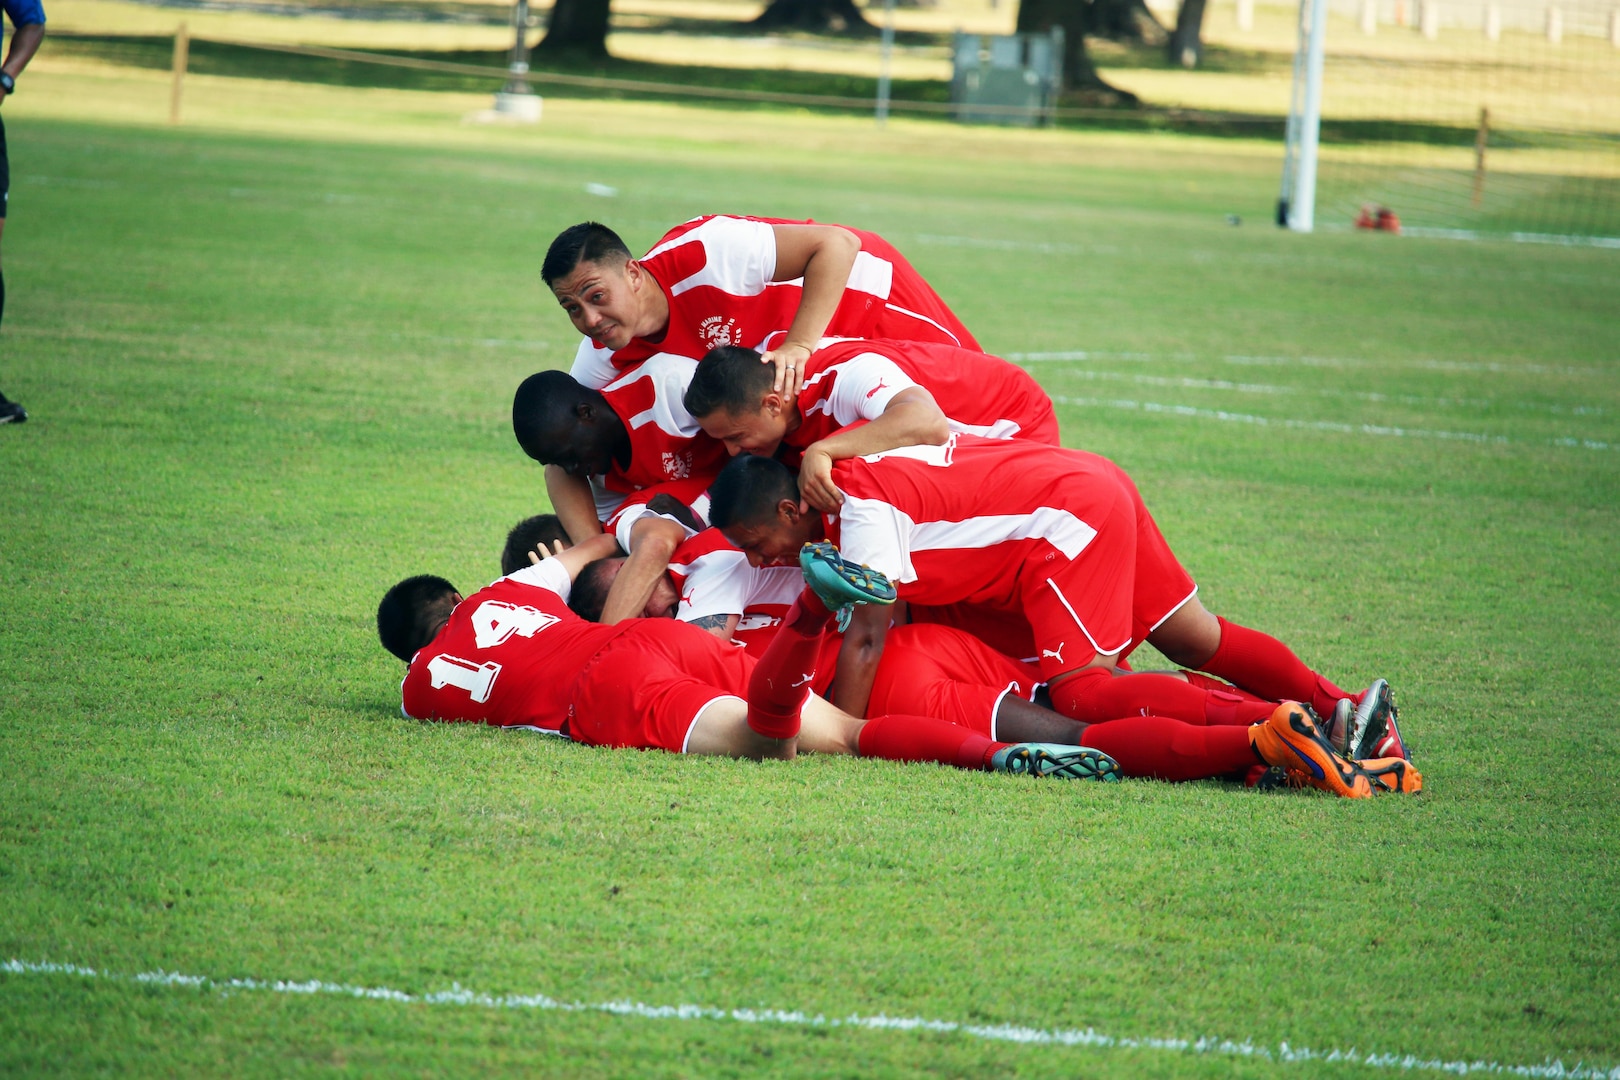 Fort Benning, Ga. - Marine Corps players celebrate after the game winning goal by Cpl Juan Medina (somewhere on the bottom) in the consolation match of the 2016 Armed Forces Men's Soccer Championship hosted at Fort Benning, Ga from 6-14 May 2016.  Marine Corps would go on to win the contest 3-2 to take third place.